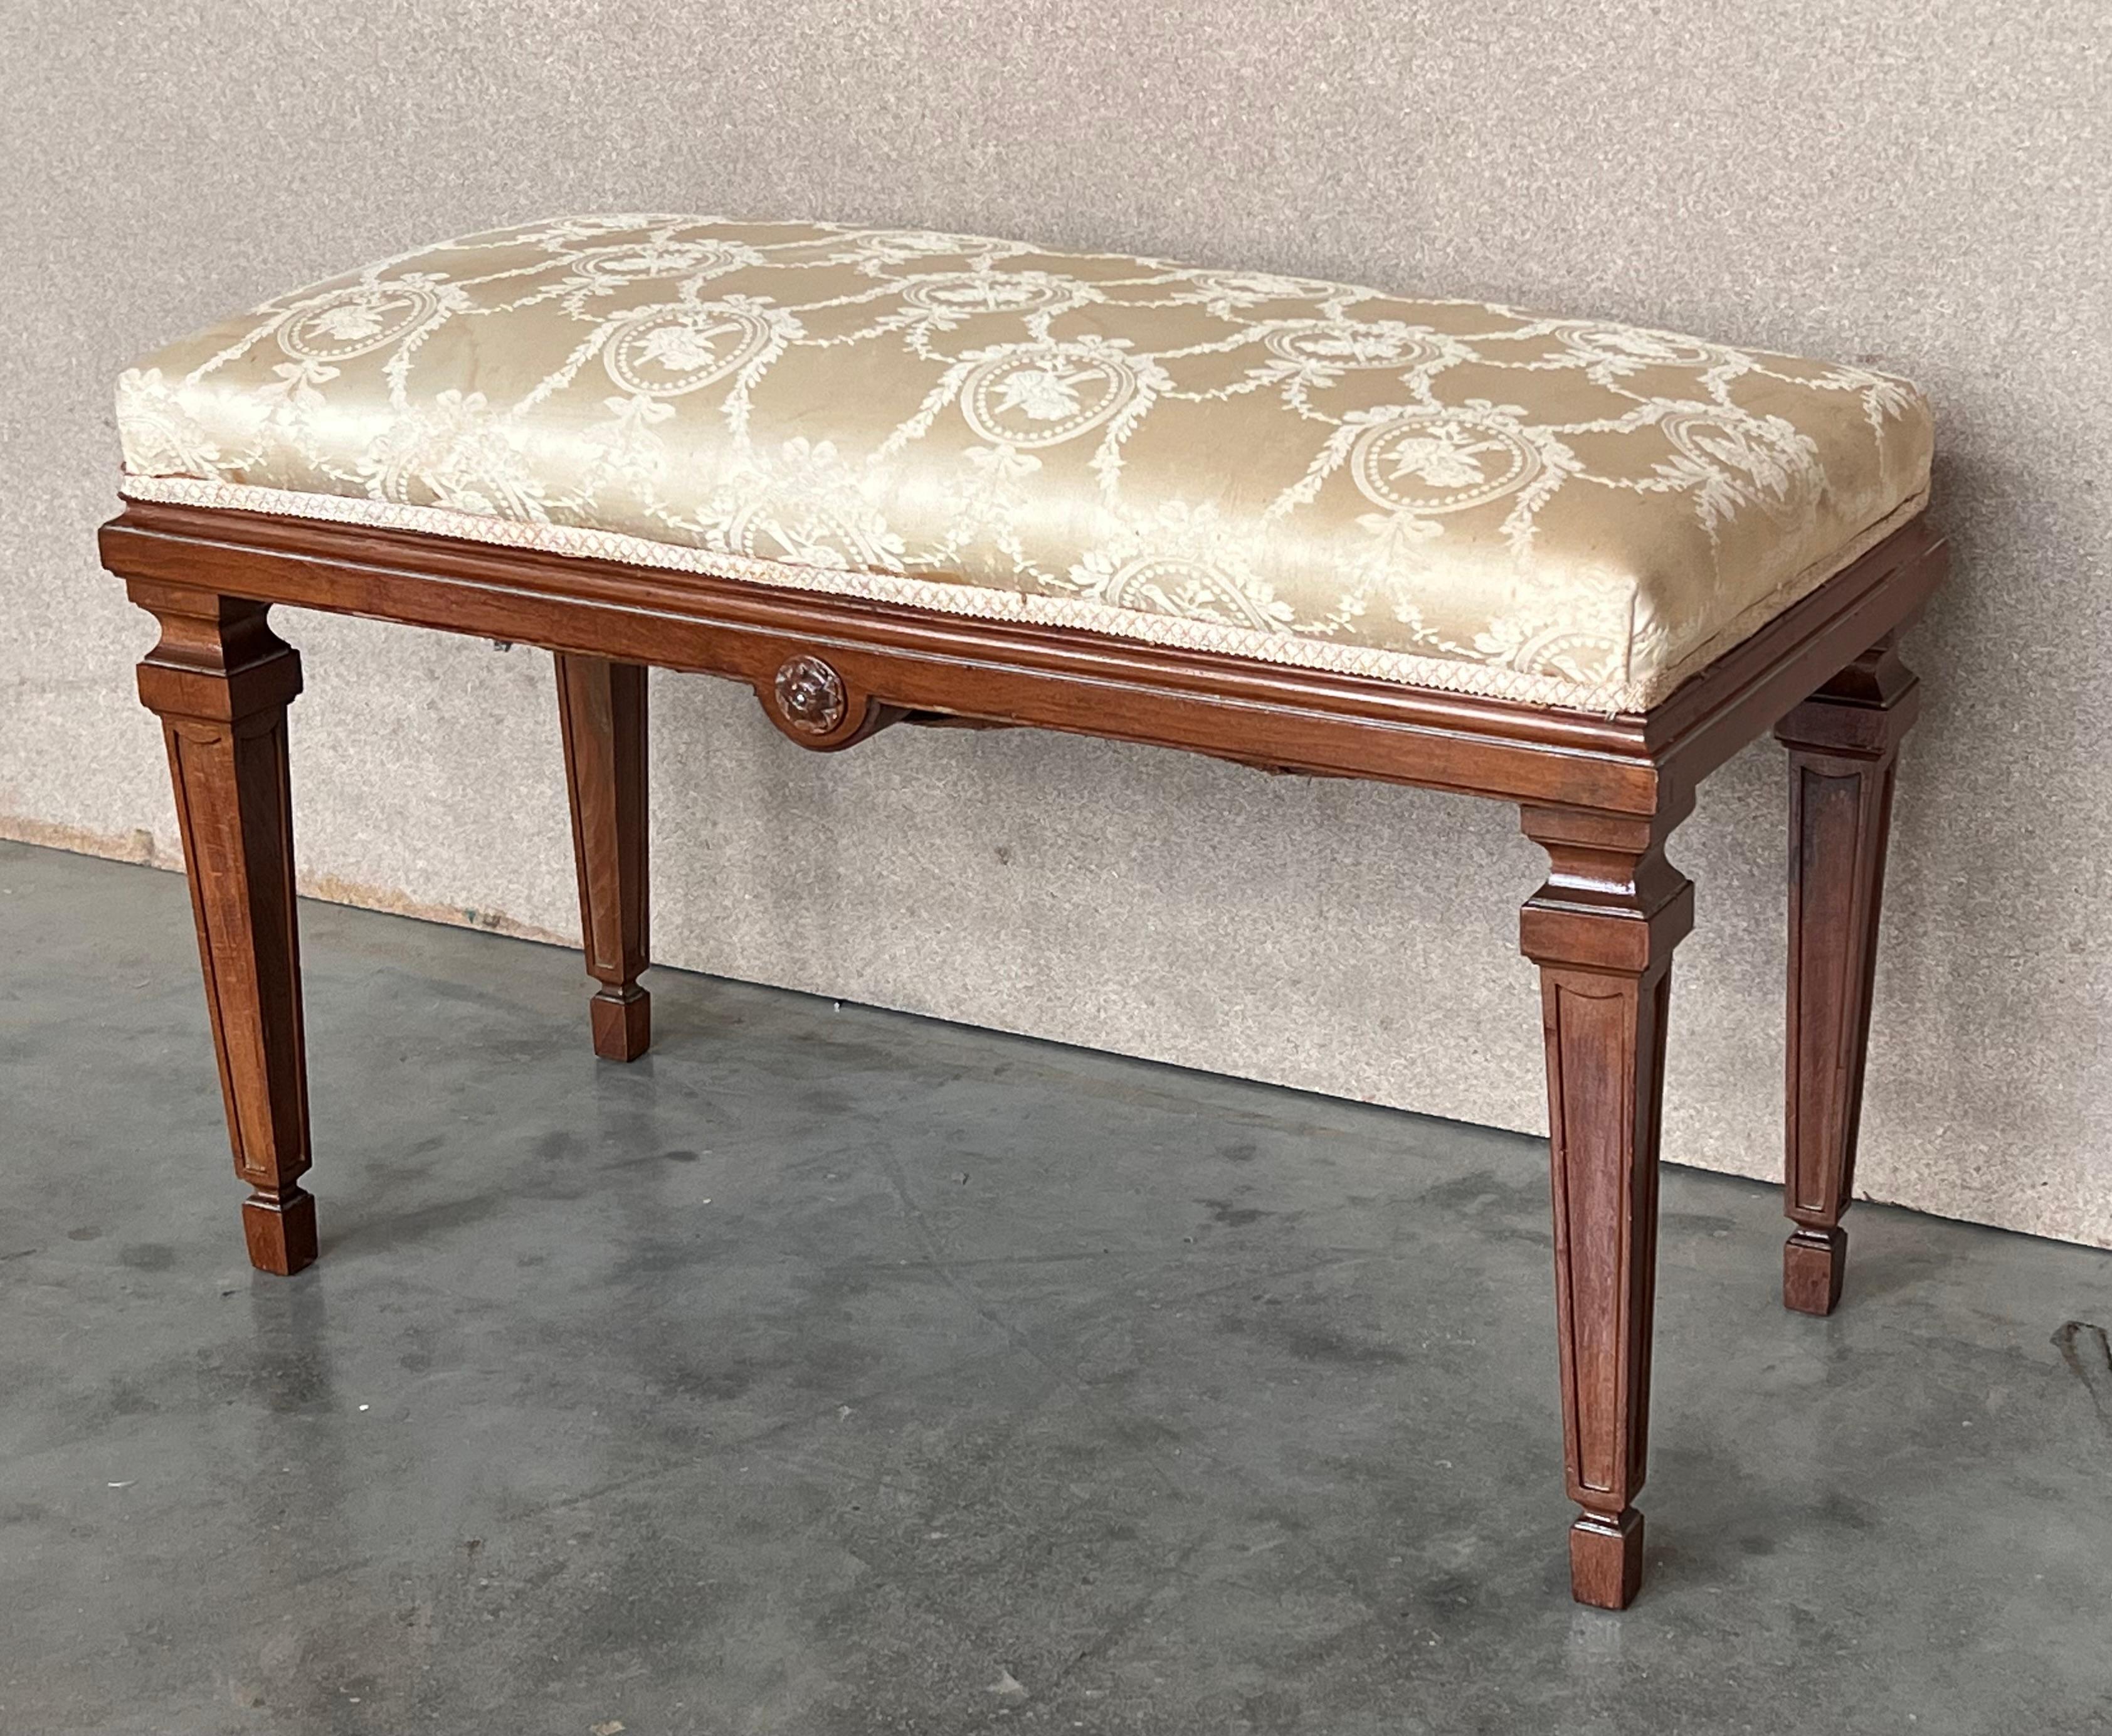 20th Century Neoclassical Style French Walnut Benches with Carved Legs, a Pair For Sale